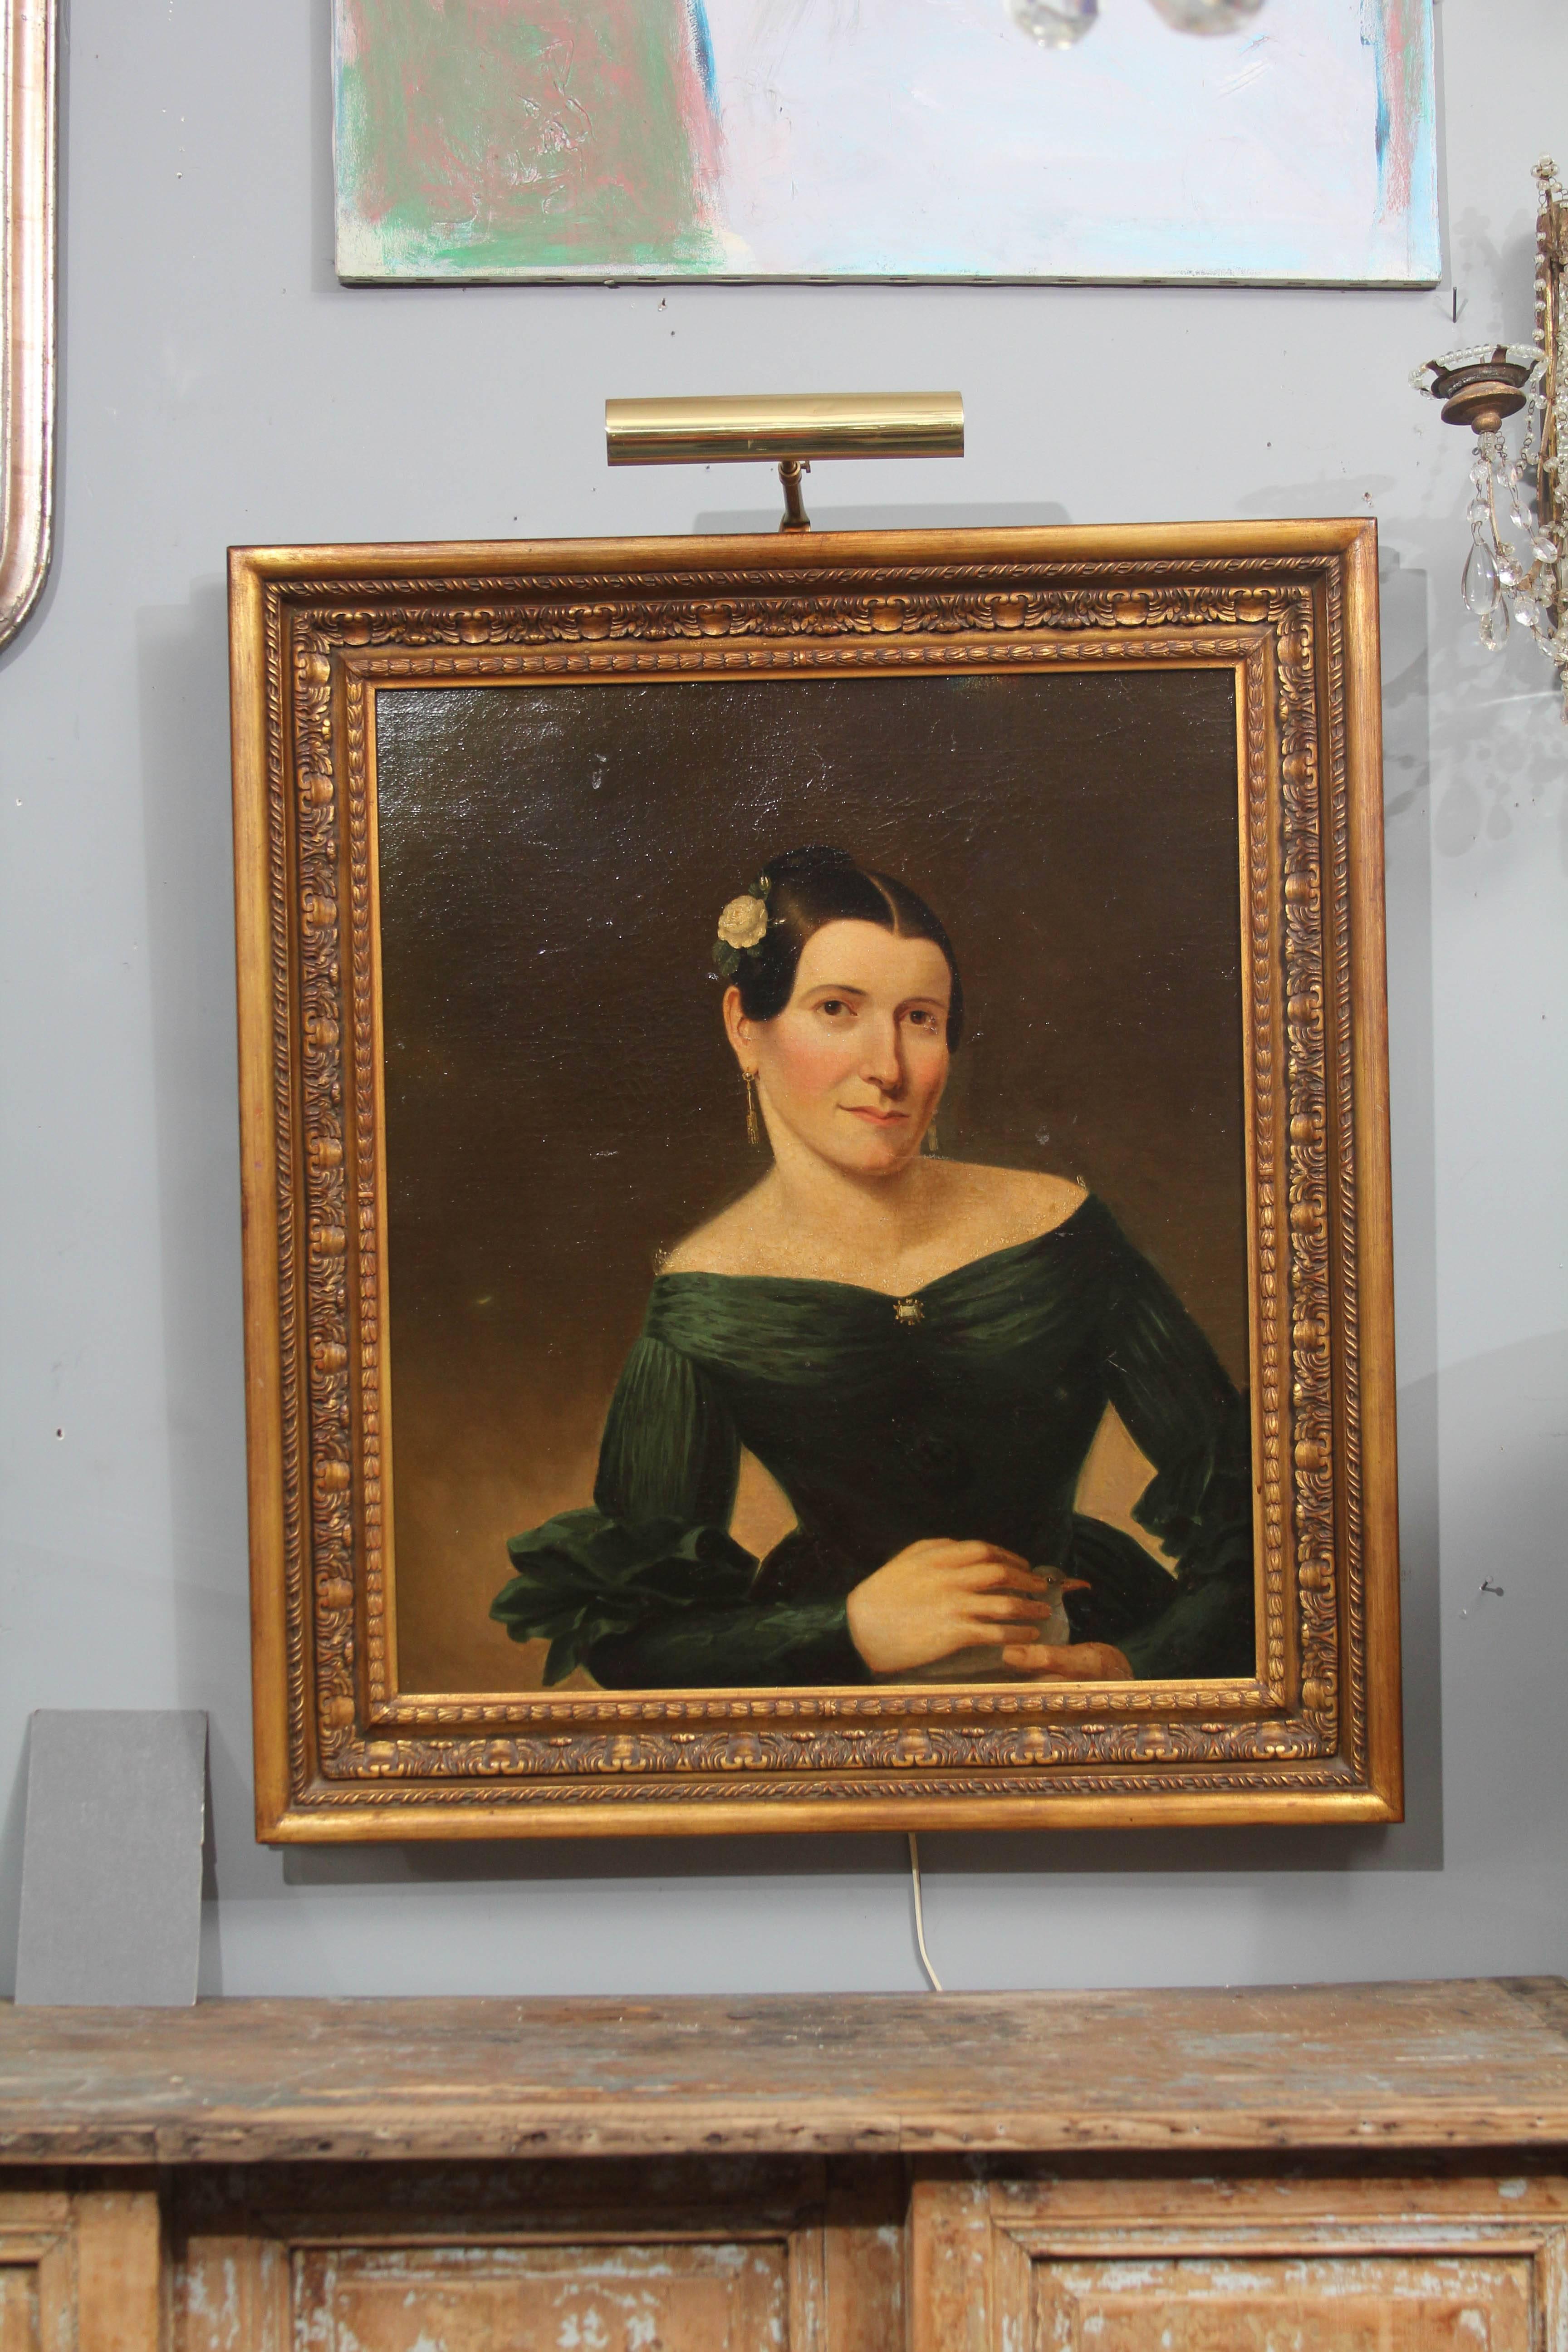 Portrait of woman holding a bird, circa 1860-1880, France
Reframed in late 20th century.